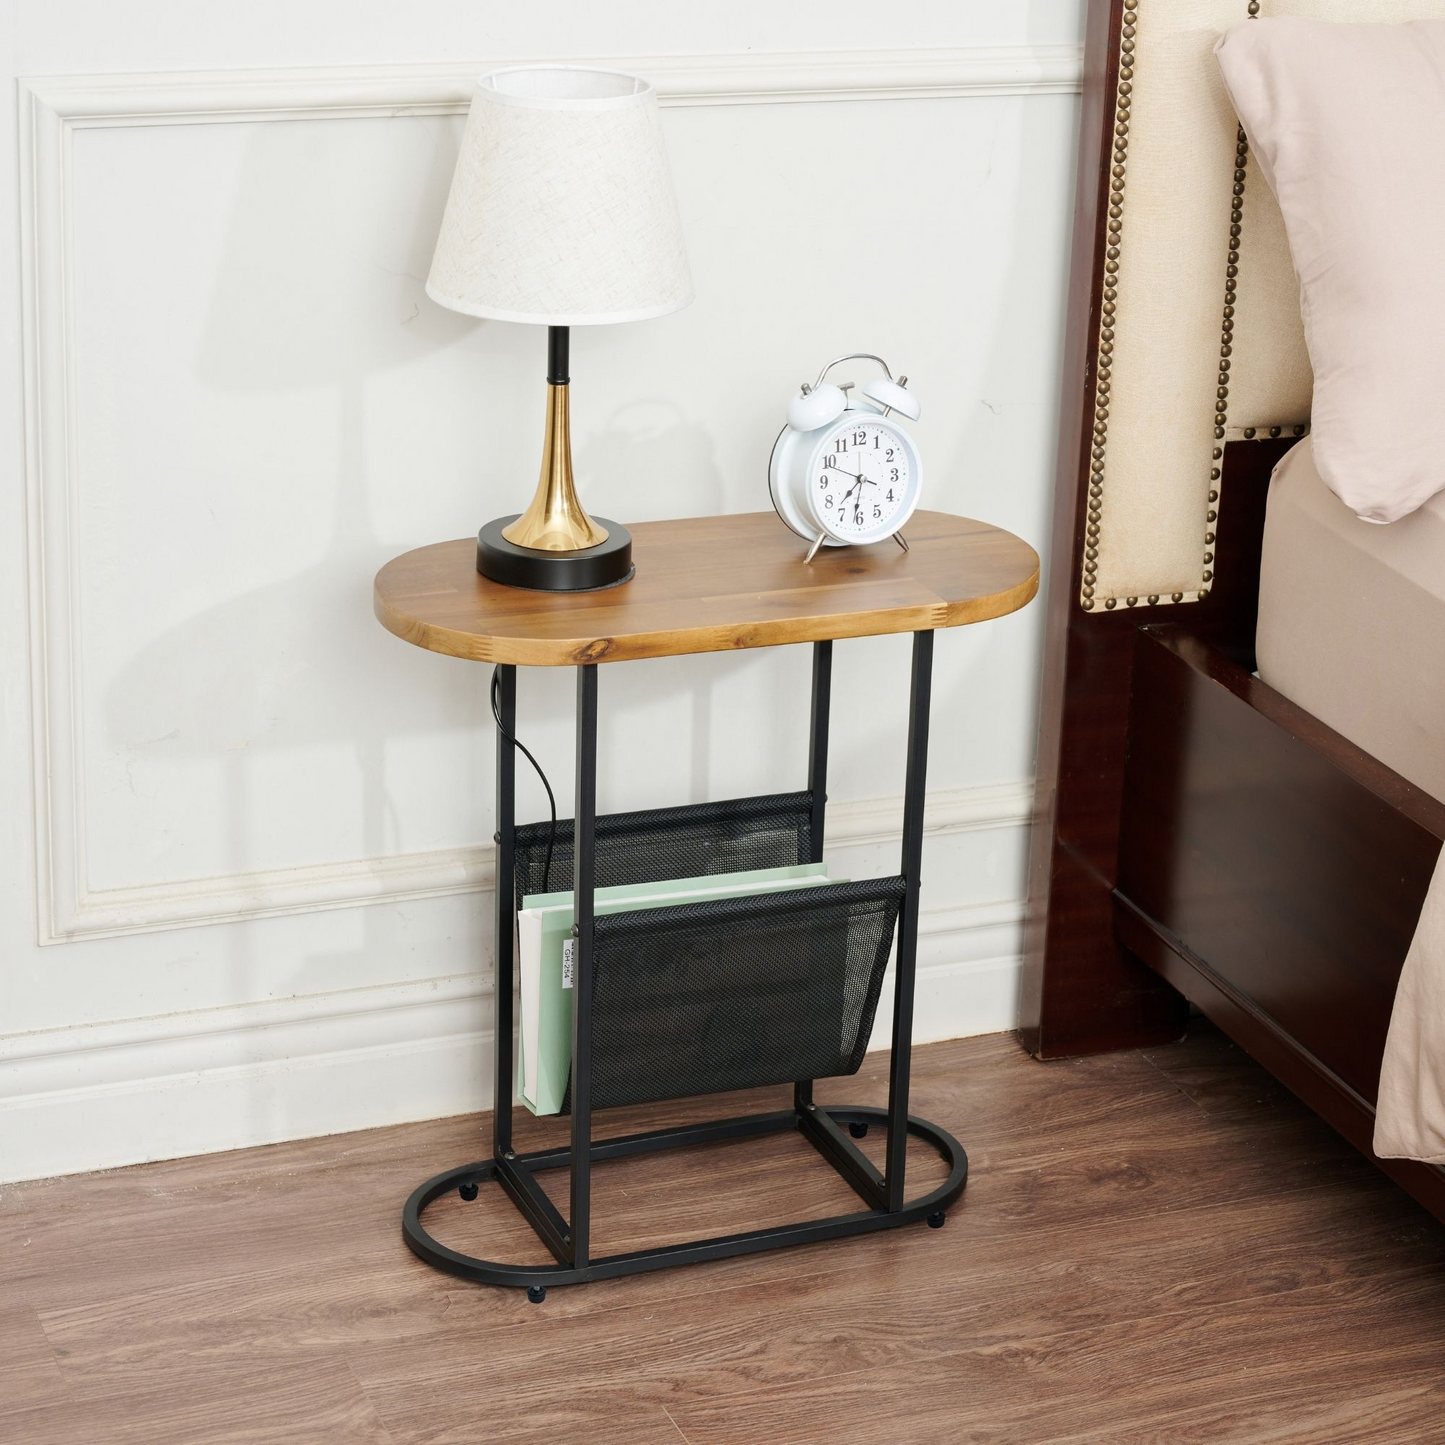 Acacia Oval Small Side Tables (Set of 2)